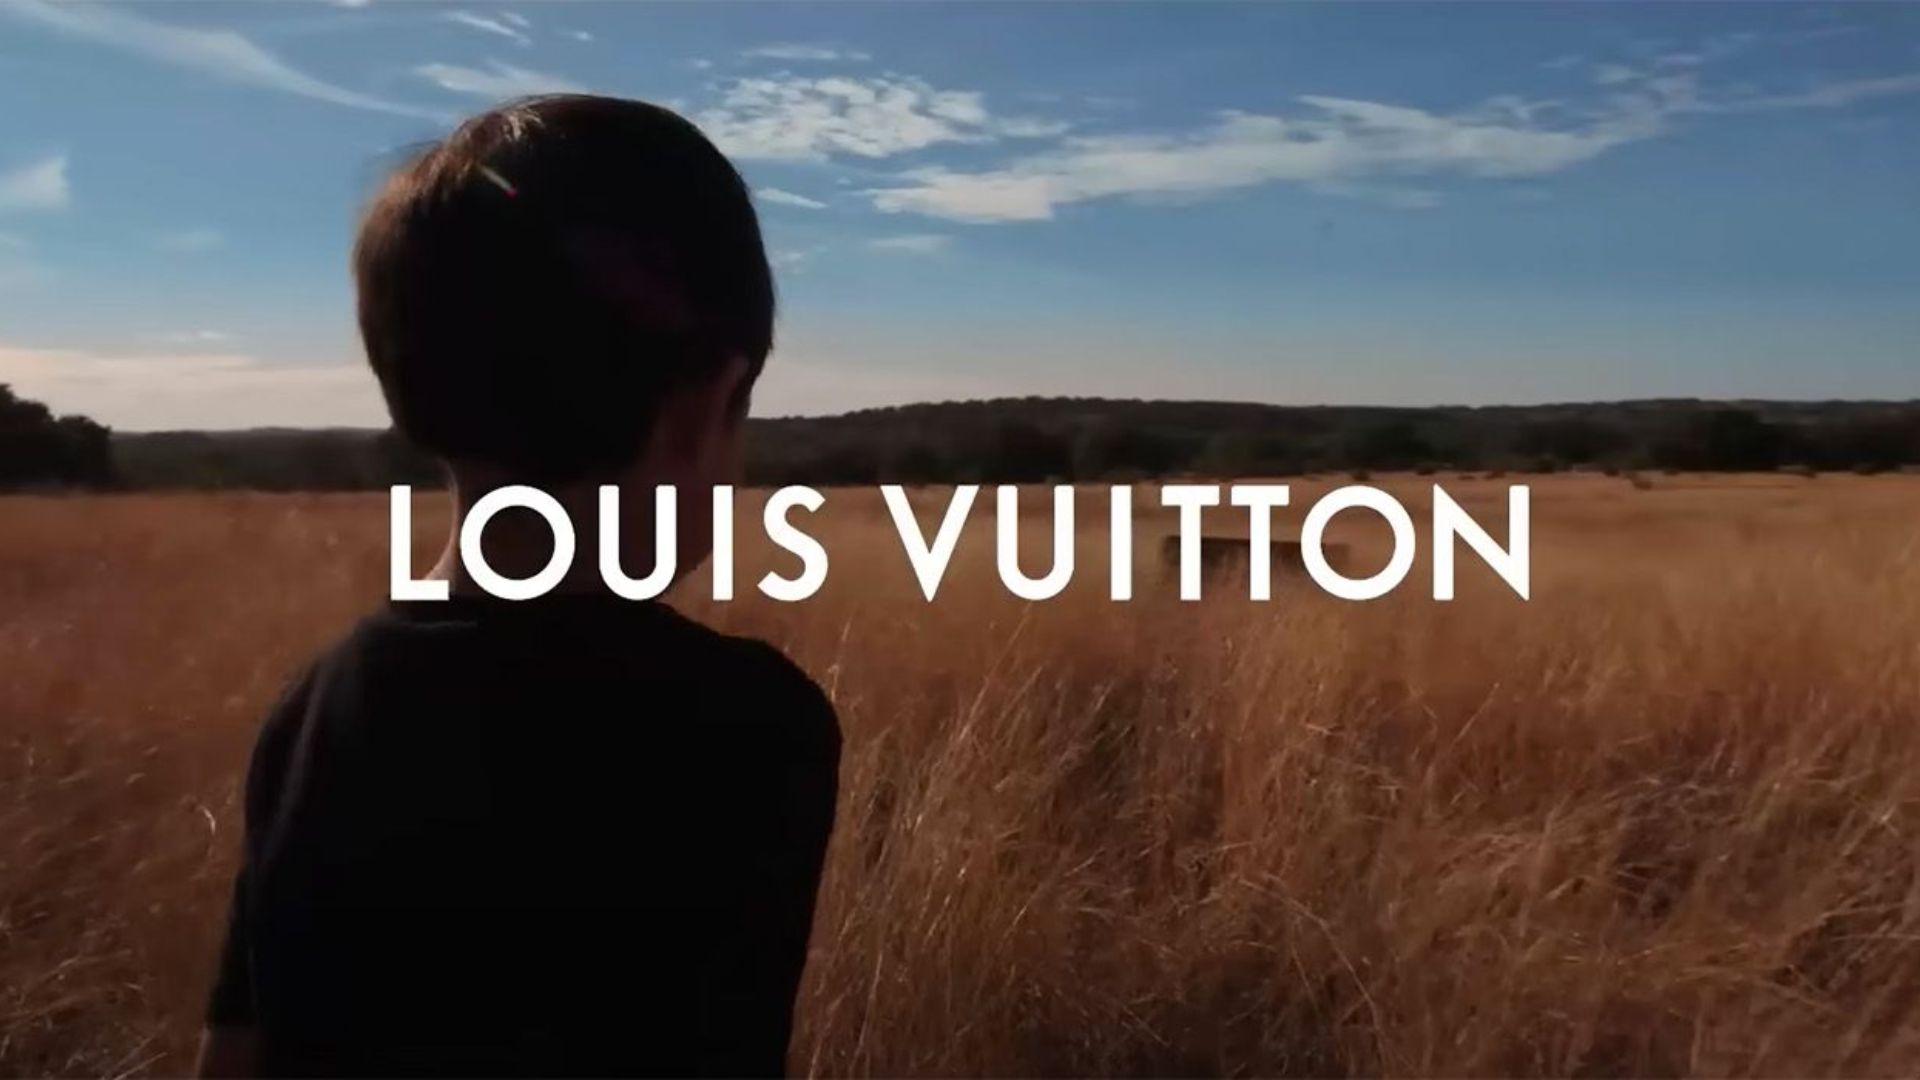 terrence malick hace comercial para louis vuitton (6)